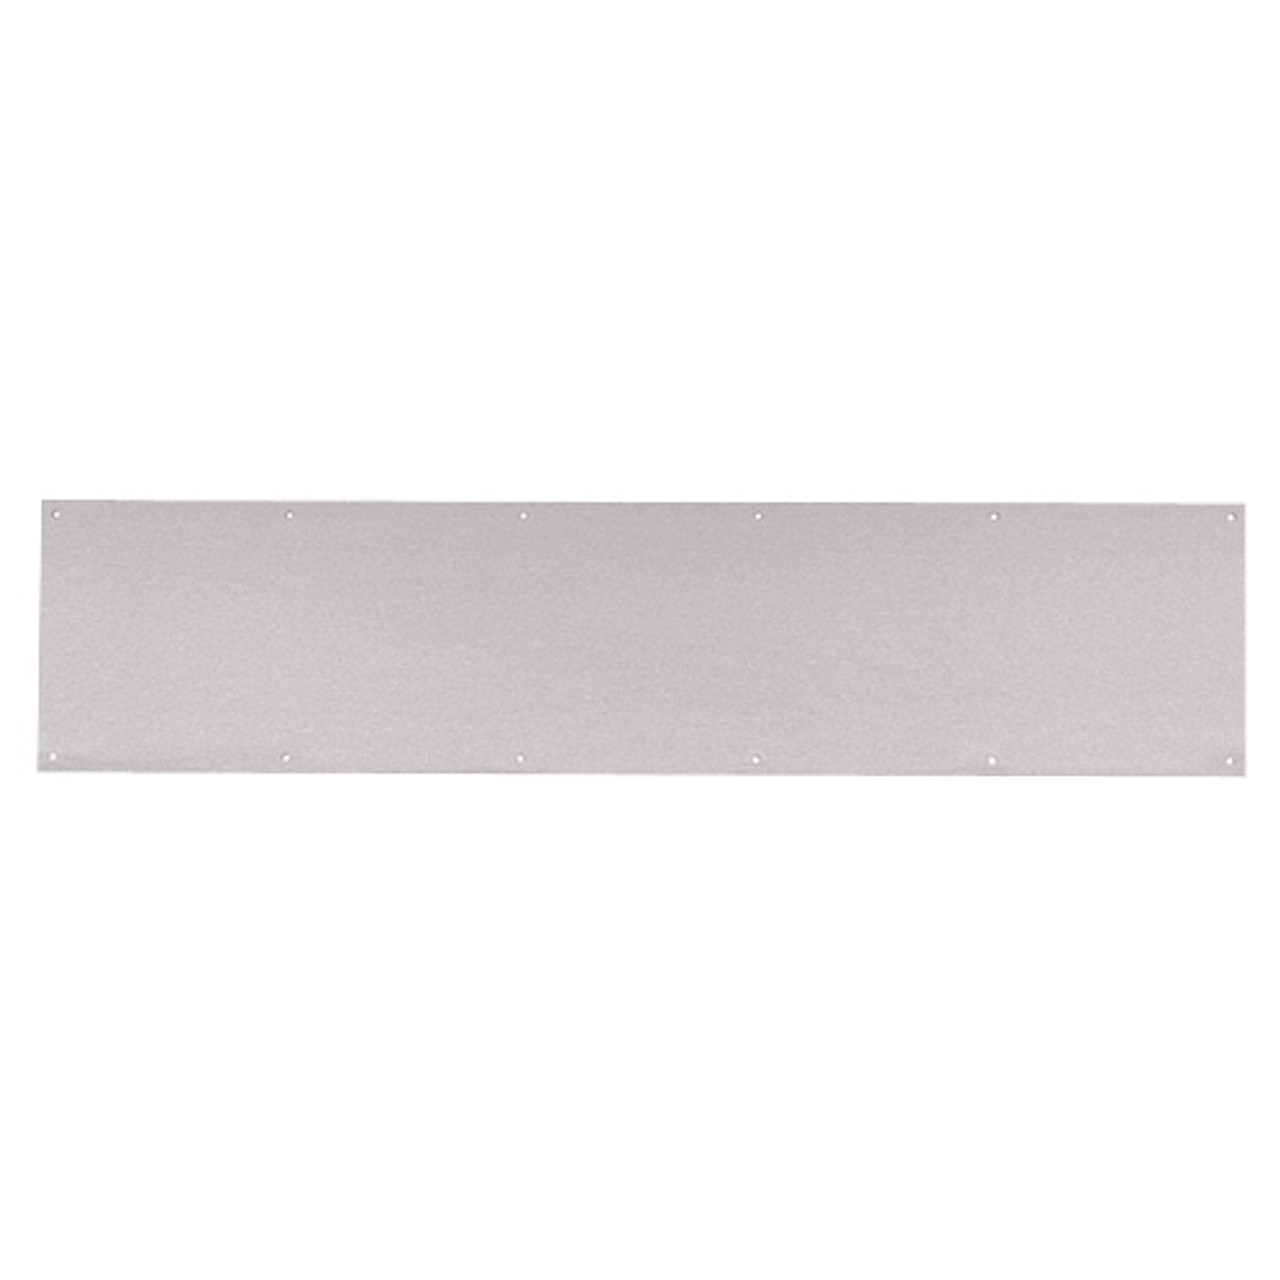 8400-US32D-24x40-B-CS Ives 8400 Series Protection Plate in Satin Stainless Steel